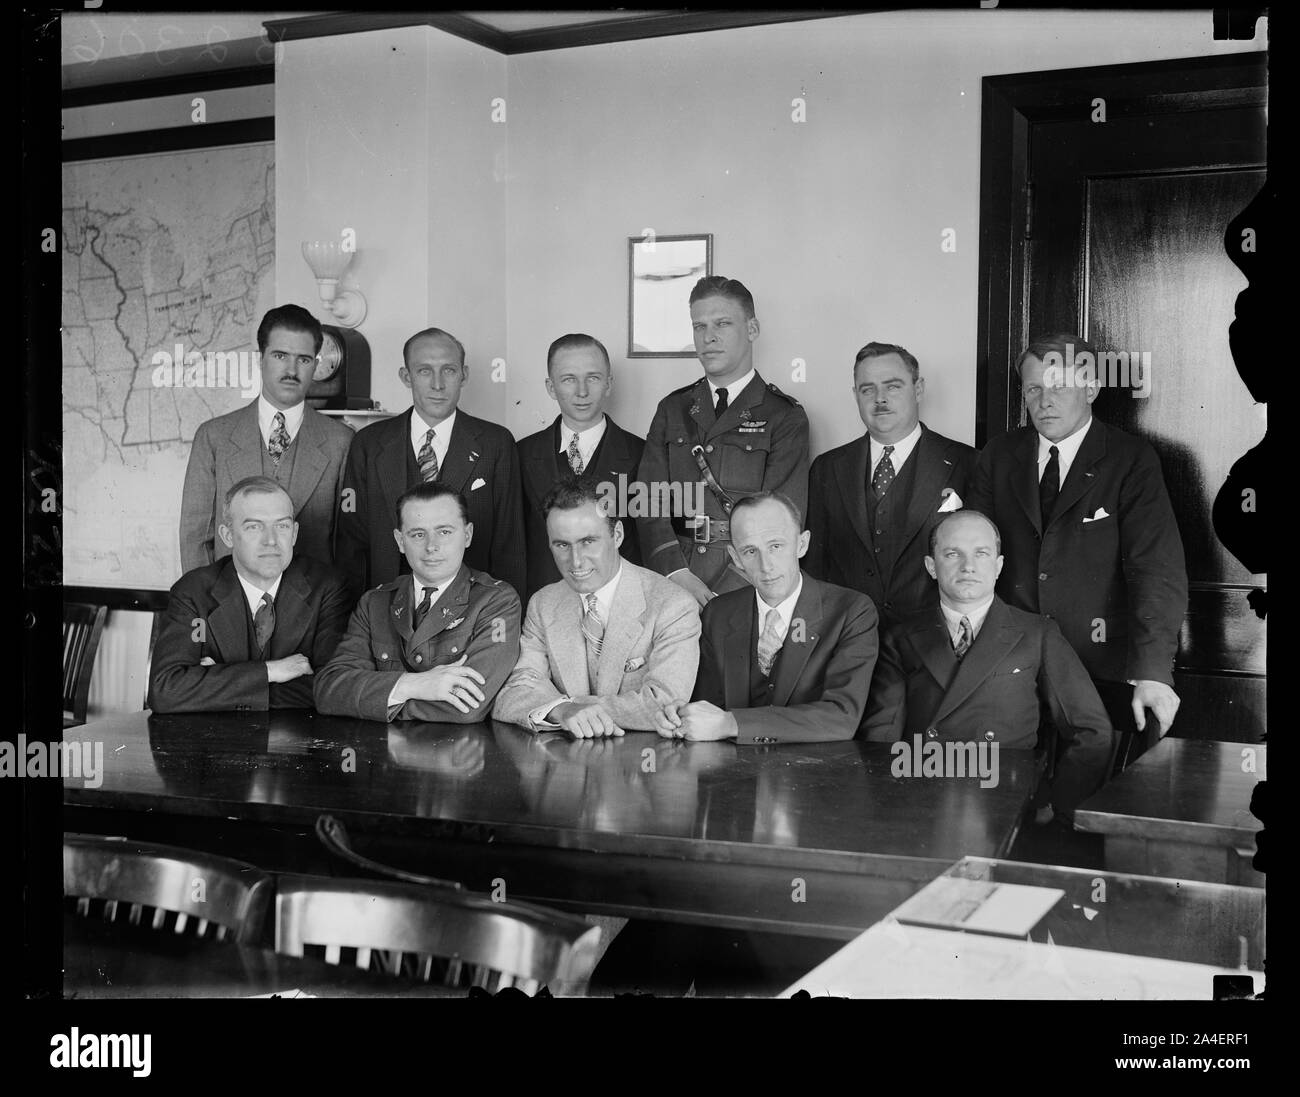 This may help the weather reports. These transoceanic flyers, meeting in Washington with officials of the U.S. Weather Bureau and the Department of Commerce. the Meteorology Committee of the Guggenheim Foundation and representatives of other aeronautical interests, hope to help in improving weather service for aviators. Left to right, seated: Assistant Secretary of Commerce for Aeronautics William P. McCracken, Jr. , Lt. A.F. Hagenberger, Col. Arthur C. Goebel, Paul Schluter, Charles Levine, left to right, standing: Emory Bronte, Edward F. Schlee, Clarence Chamberlain, Lt. Lester J. Maitland, Stock Photo